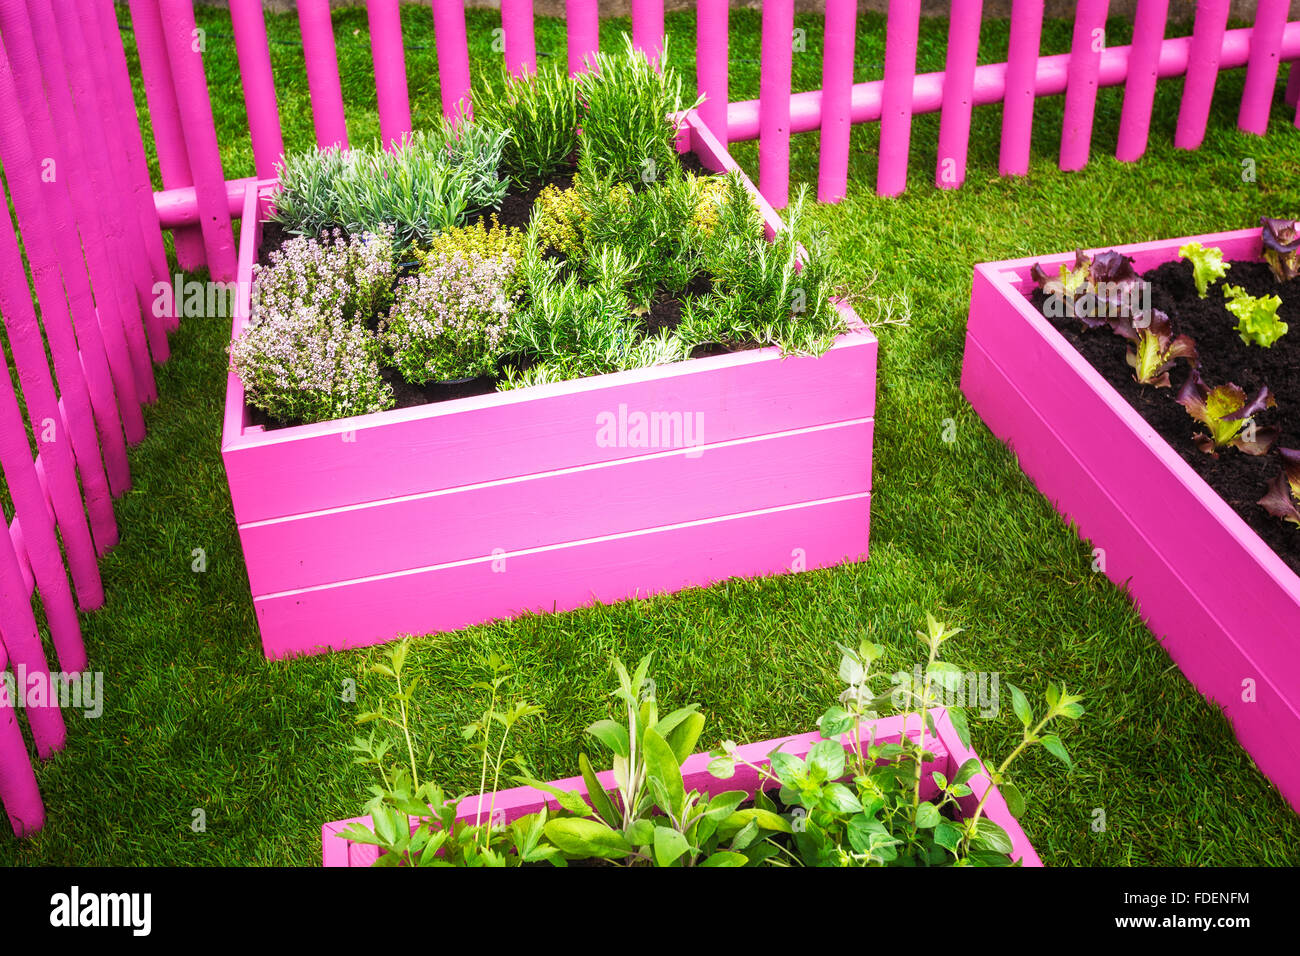 Herb garden. Pink raised beds with herbs and vegetables. Trendy garden design Stock Photo